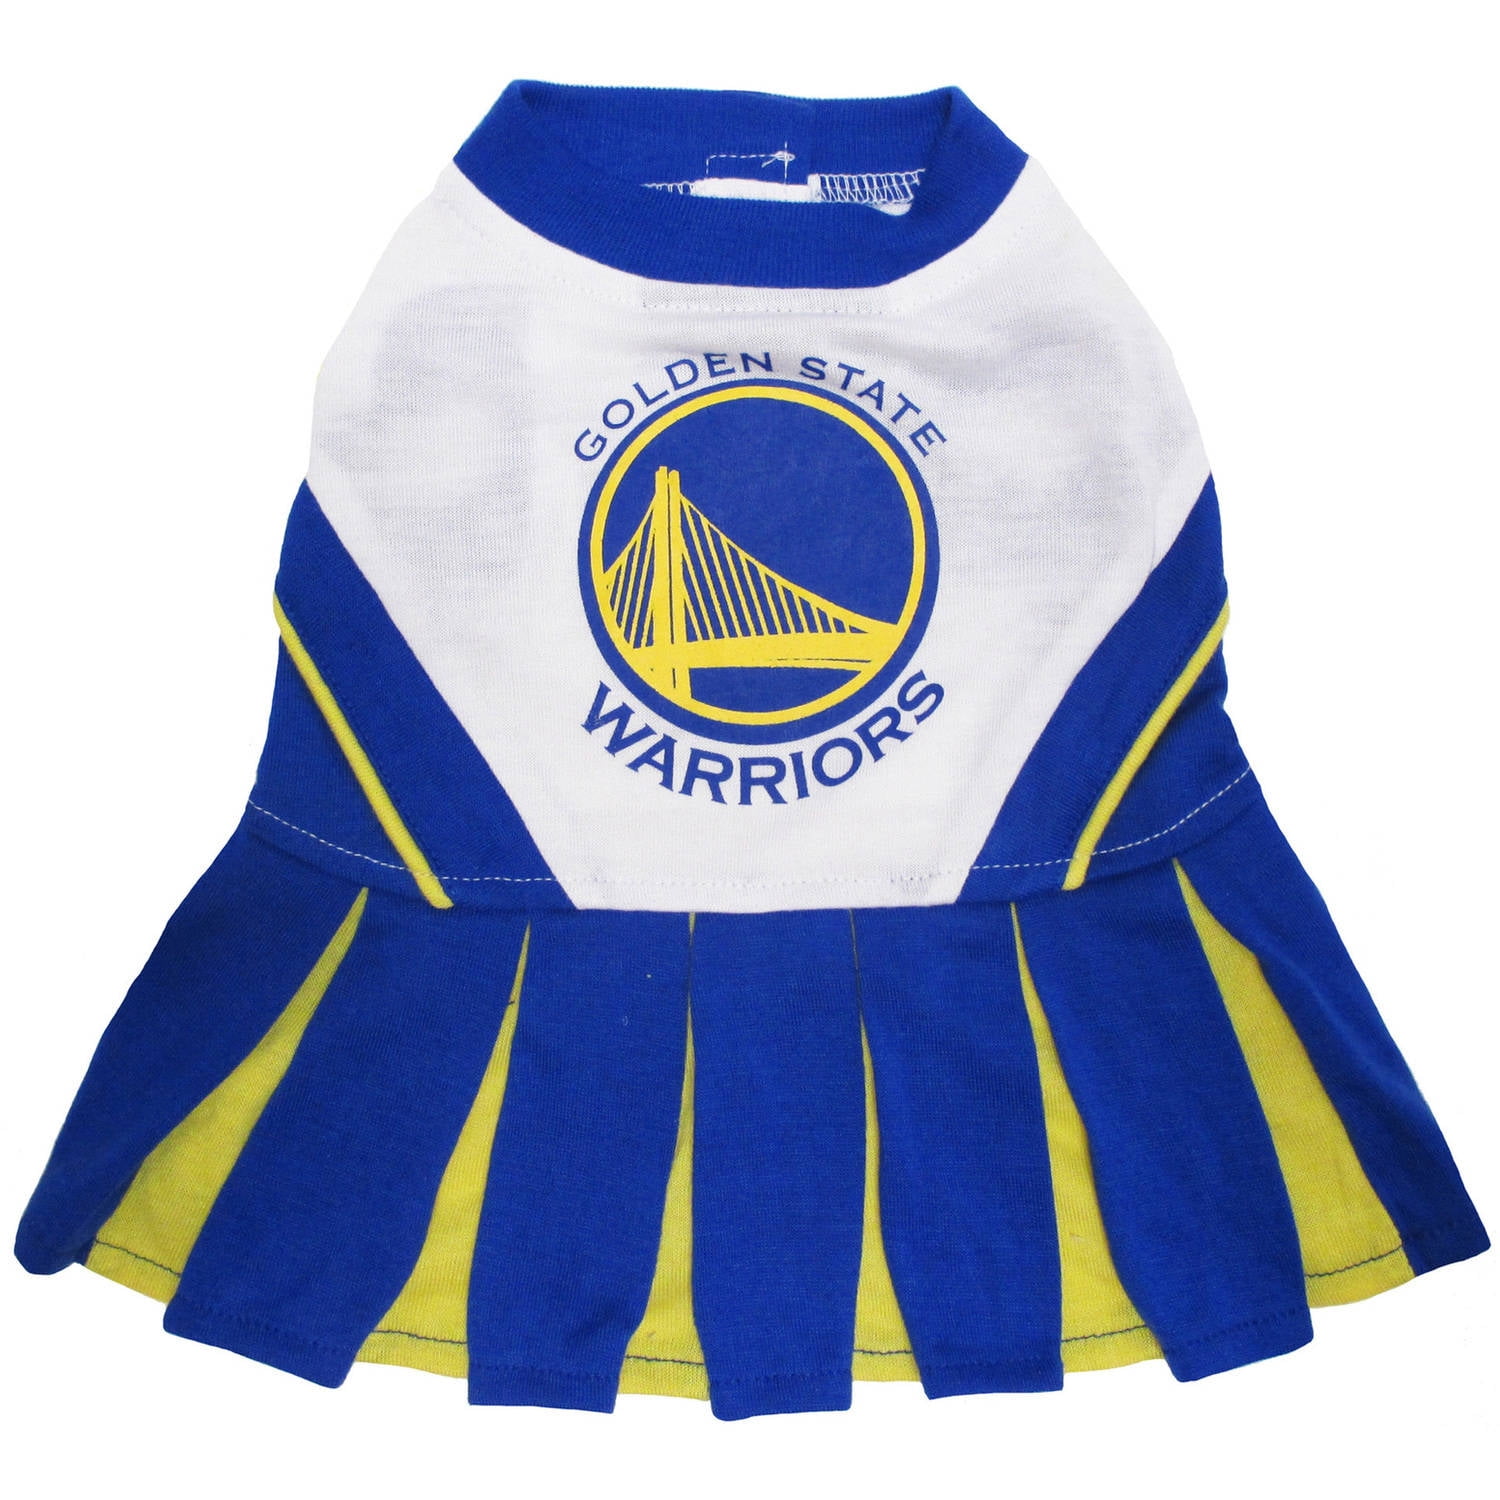 Warriors outfit  Warrior outfit, Basketball dress, Golden state warriors  outfit